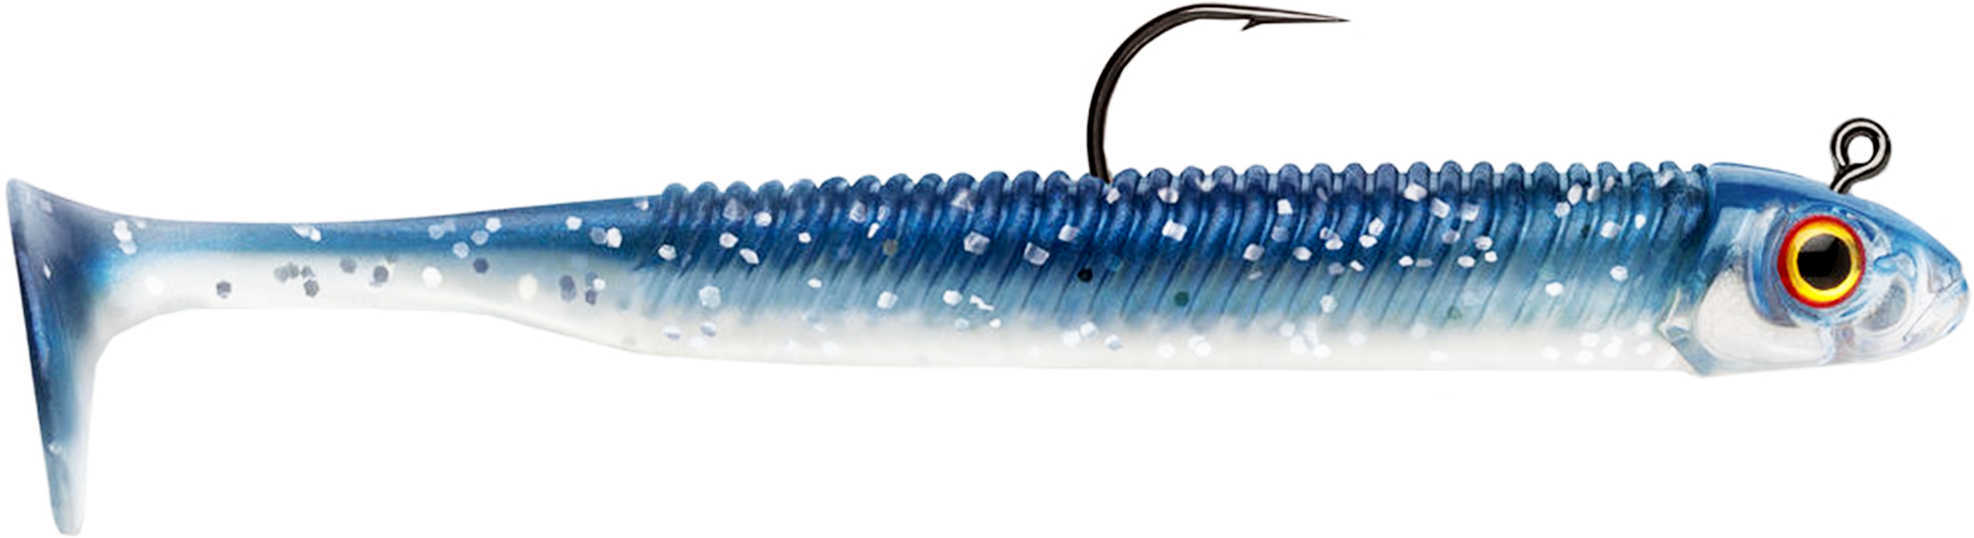 Storm 360GT Searchbait Lure 4.5 Inches 1/4 Ounce, Tru Blue, Pack of 1 Md: SBM45TB-14J